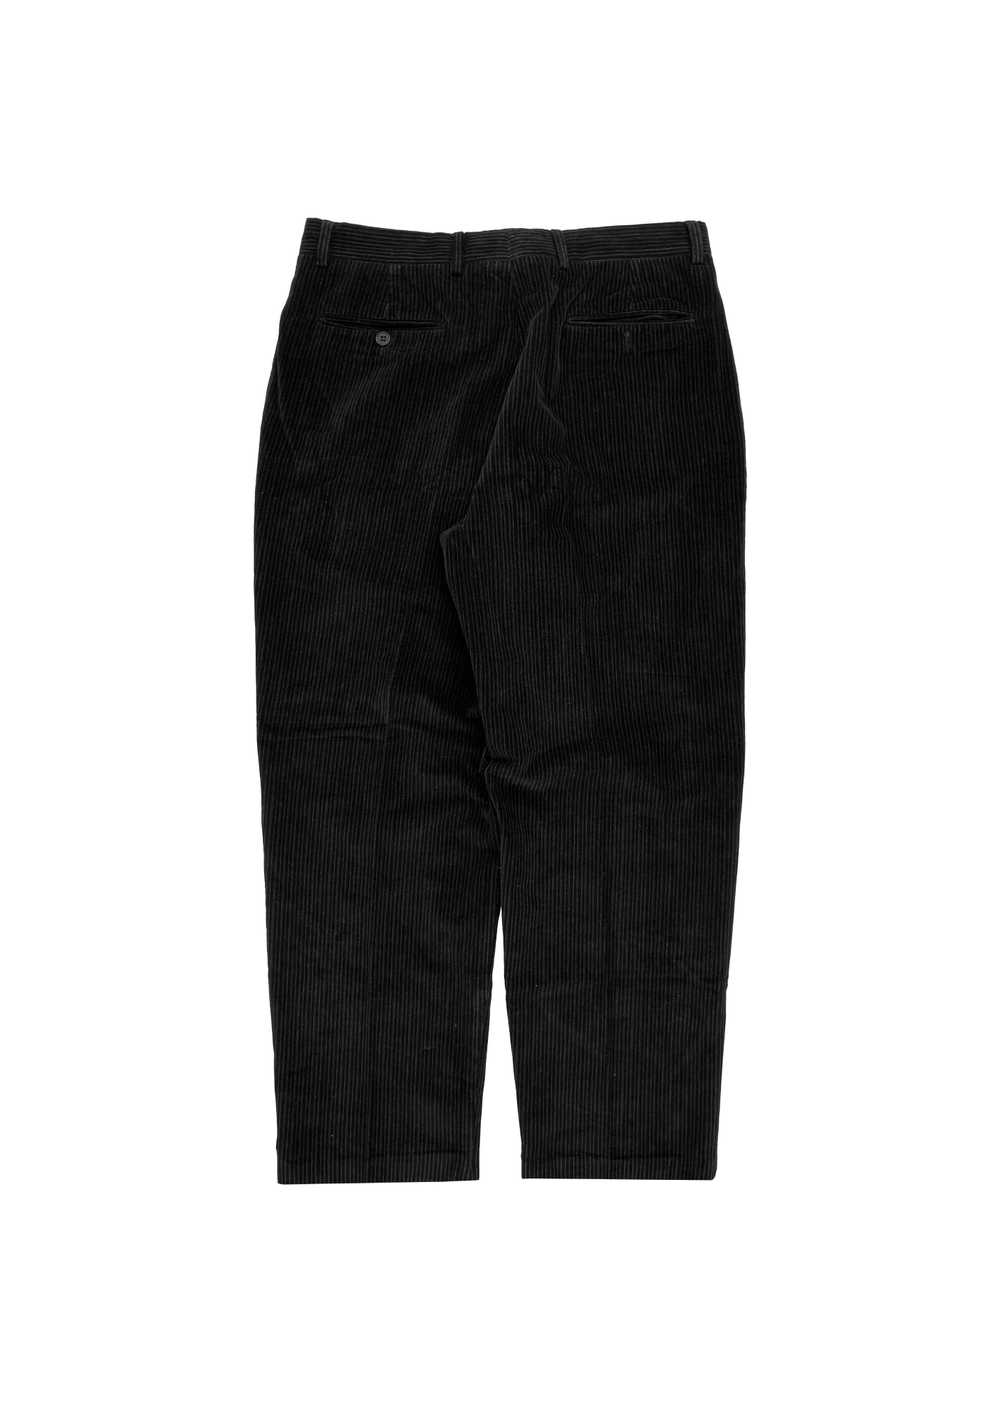 Givenchy 90’s Givenchy Homme Black Corduroy Trous… - image 3